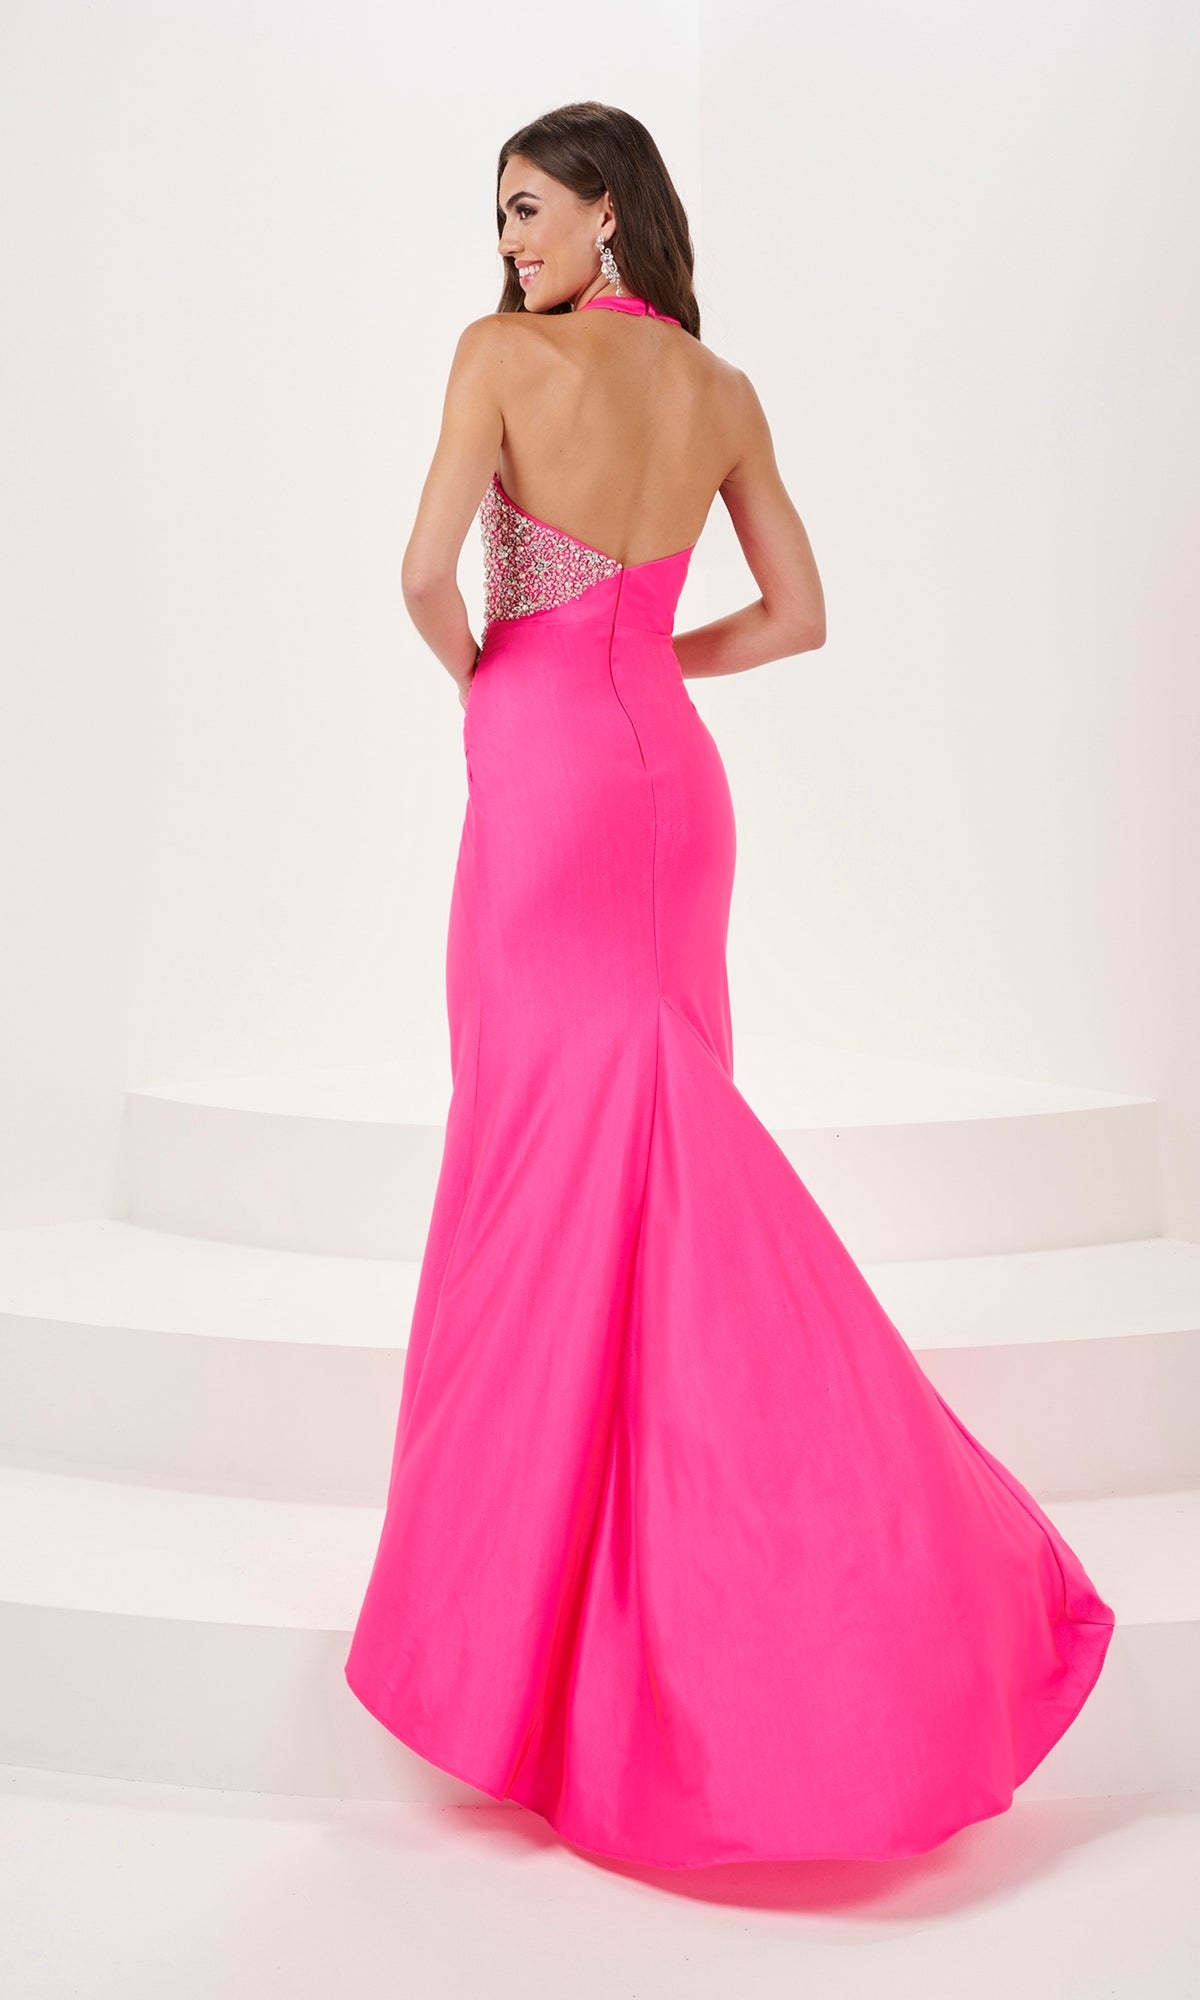 Long Prom Dress 14175 by Panoply